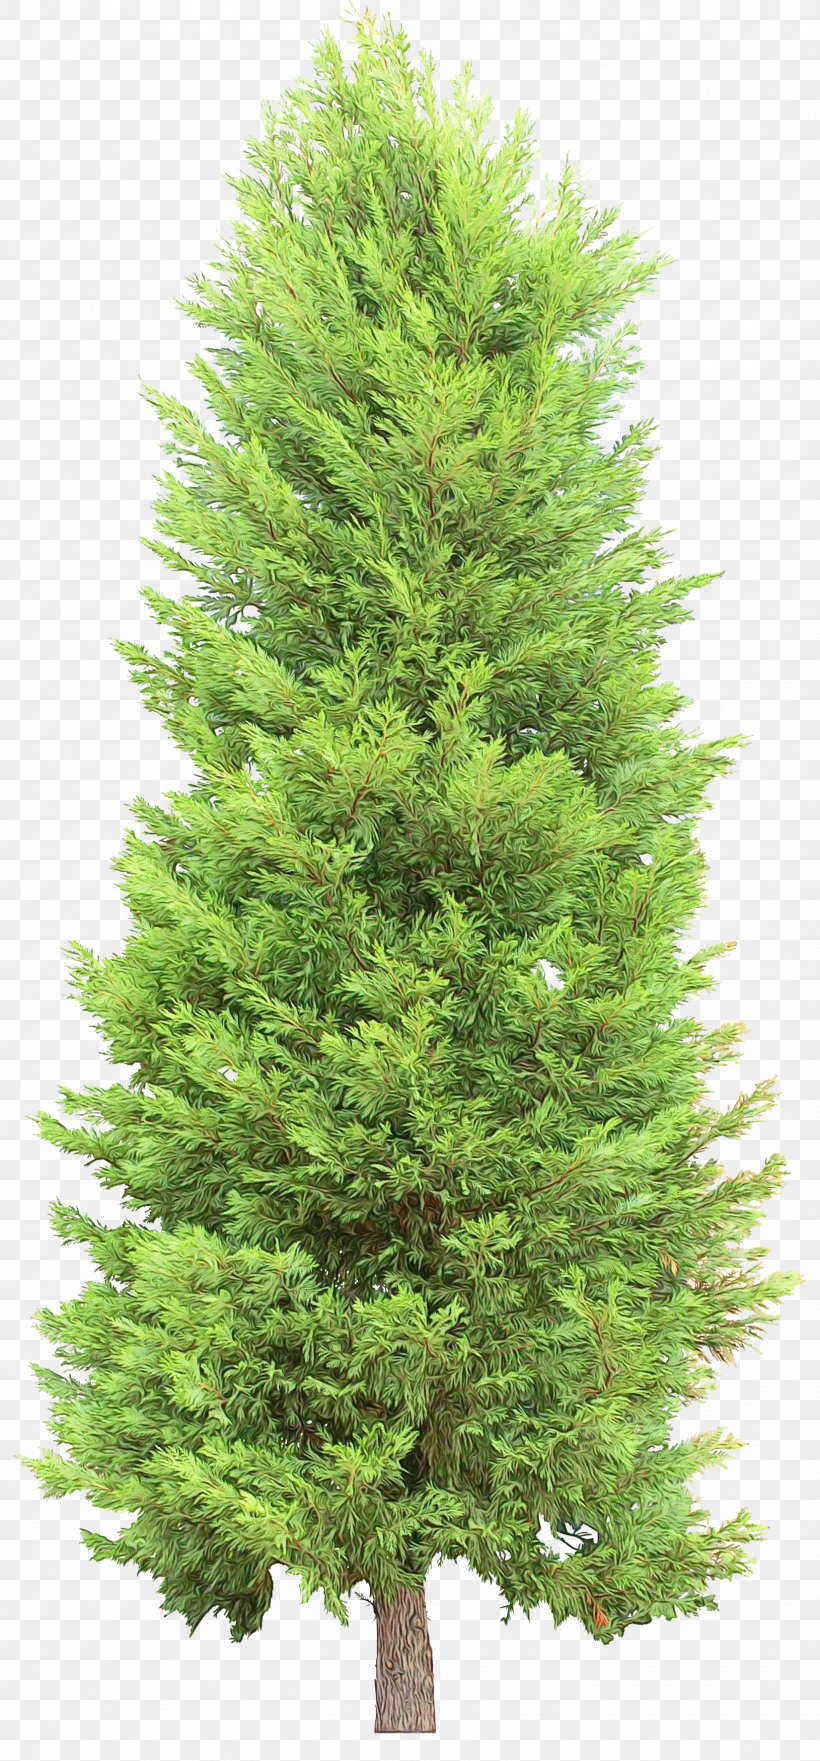 Tree Shortleaf Black Spruce Columbian Spruce Balsam Fir White Pine, PNG, 1629x3500px, Watercolor, Balsam Fir, Canadian Fir, Columbian Spruce, Lodgepole Pine Download Free